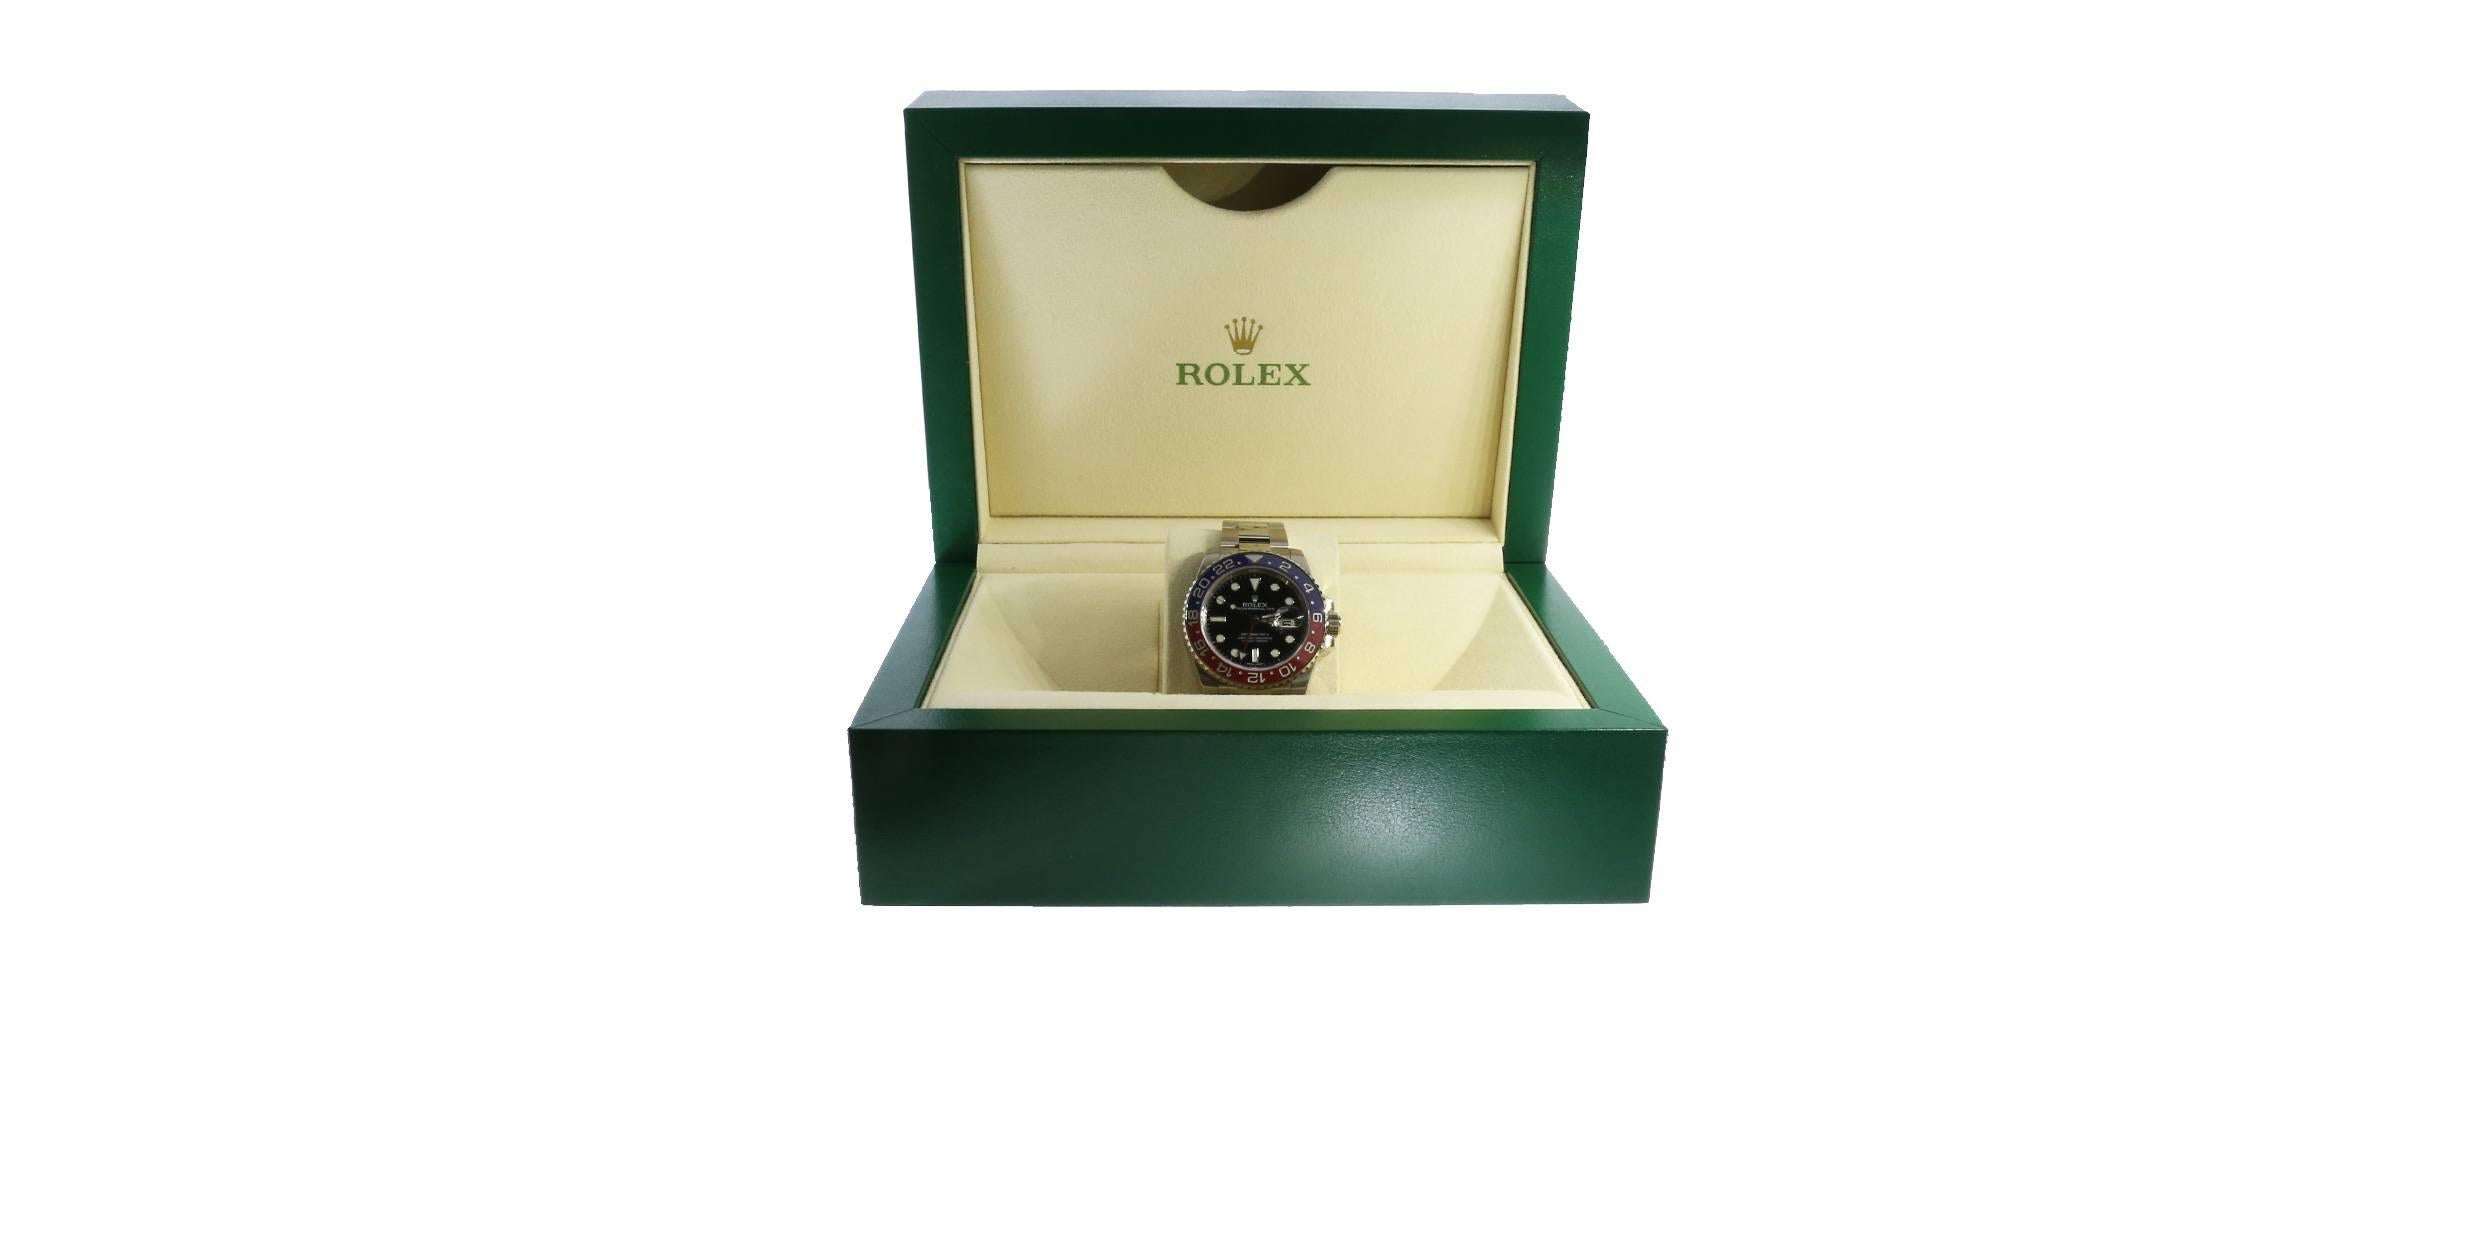 
This watch is a dream for Rolex collectors! The Rolex GMT Master was originally designed for airline pilots so they could stay on the standard Greenwich Mean Time as well as the time zone for whichever part of the world they were currently in.